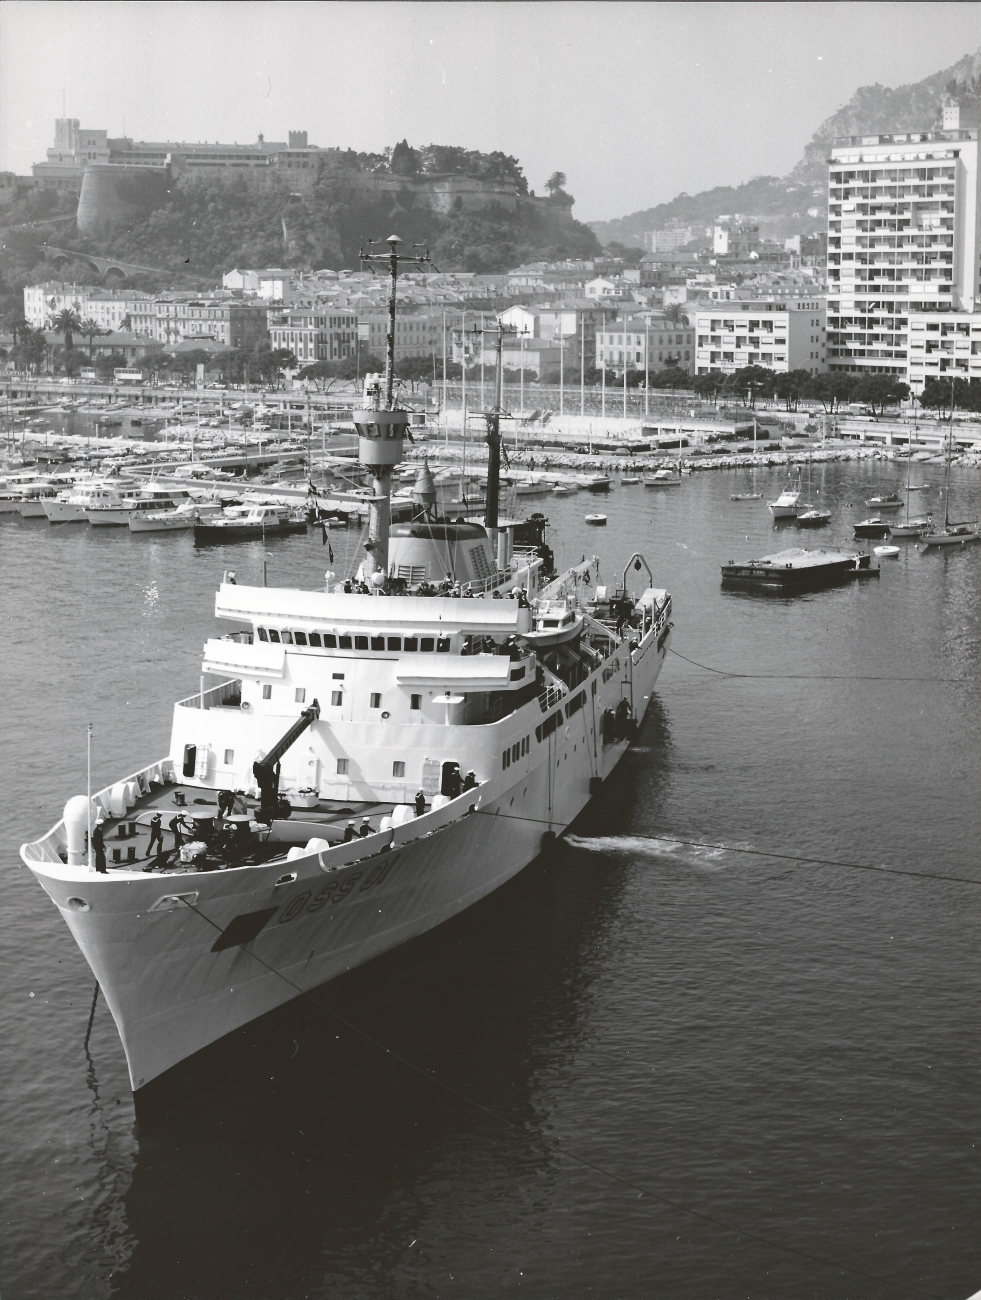 The USC&GS; OCEANOGRAPHER being secured to the pier at Monaco